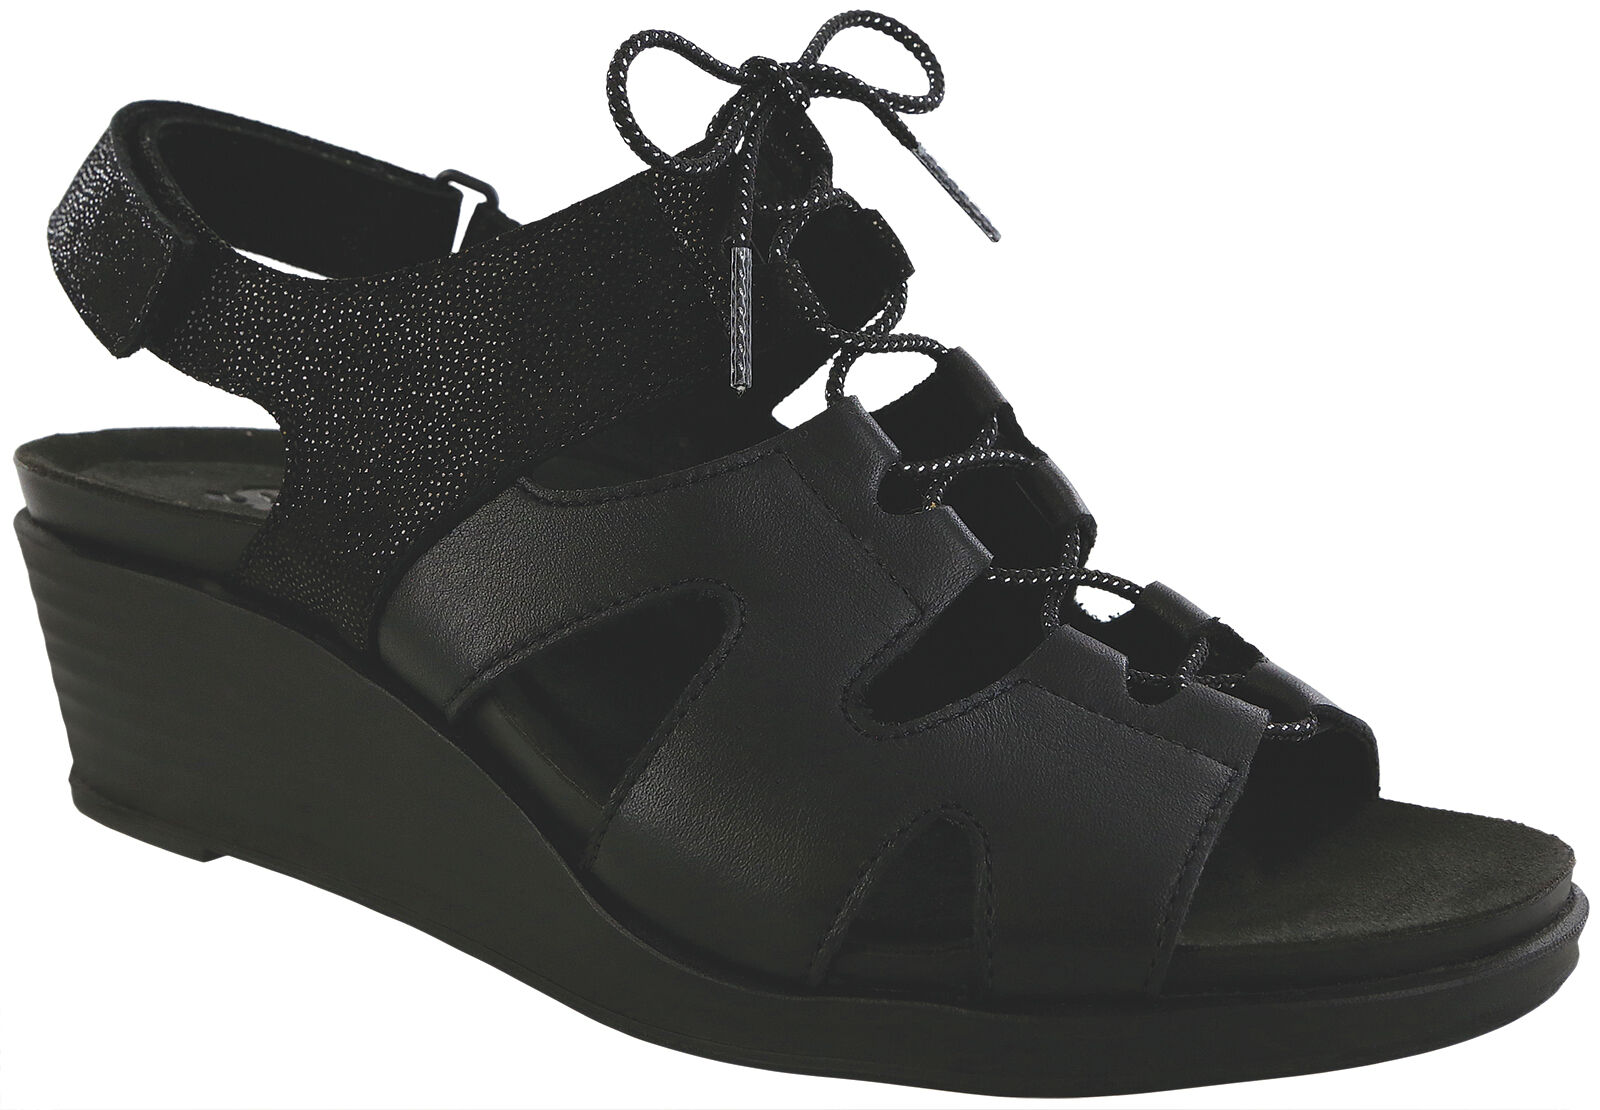 HG- Orthopedic Cross Strap Wedge Sandals for Superior Comfort and Styl –  Her Gloss© All Footwear Needs